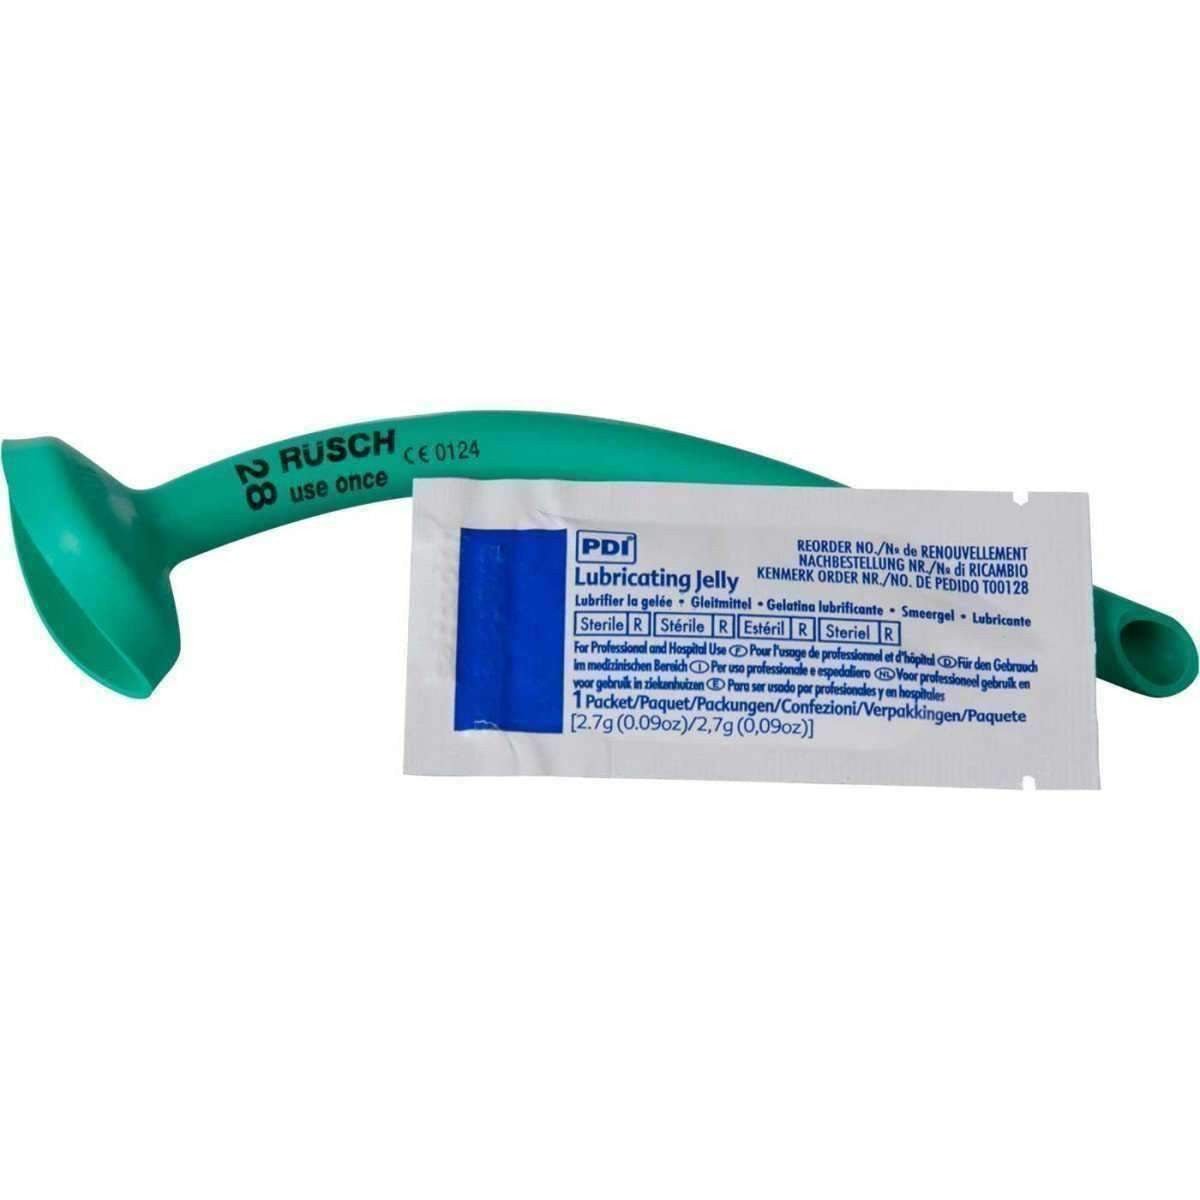 Nasopharyngeal Airway Device w/Lubricating Jelly - MED-TAC International Corp. - Rusch